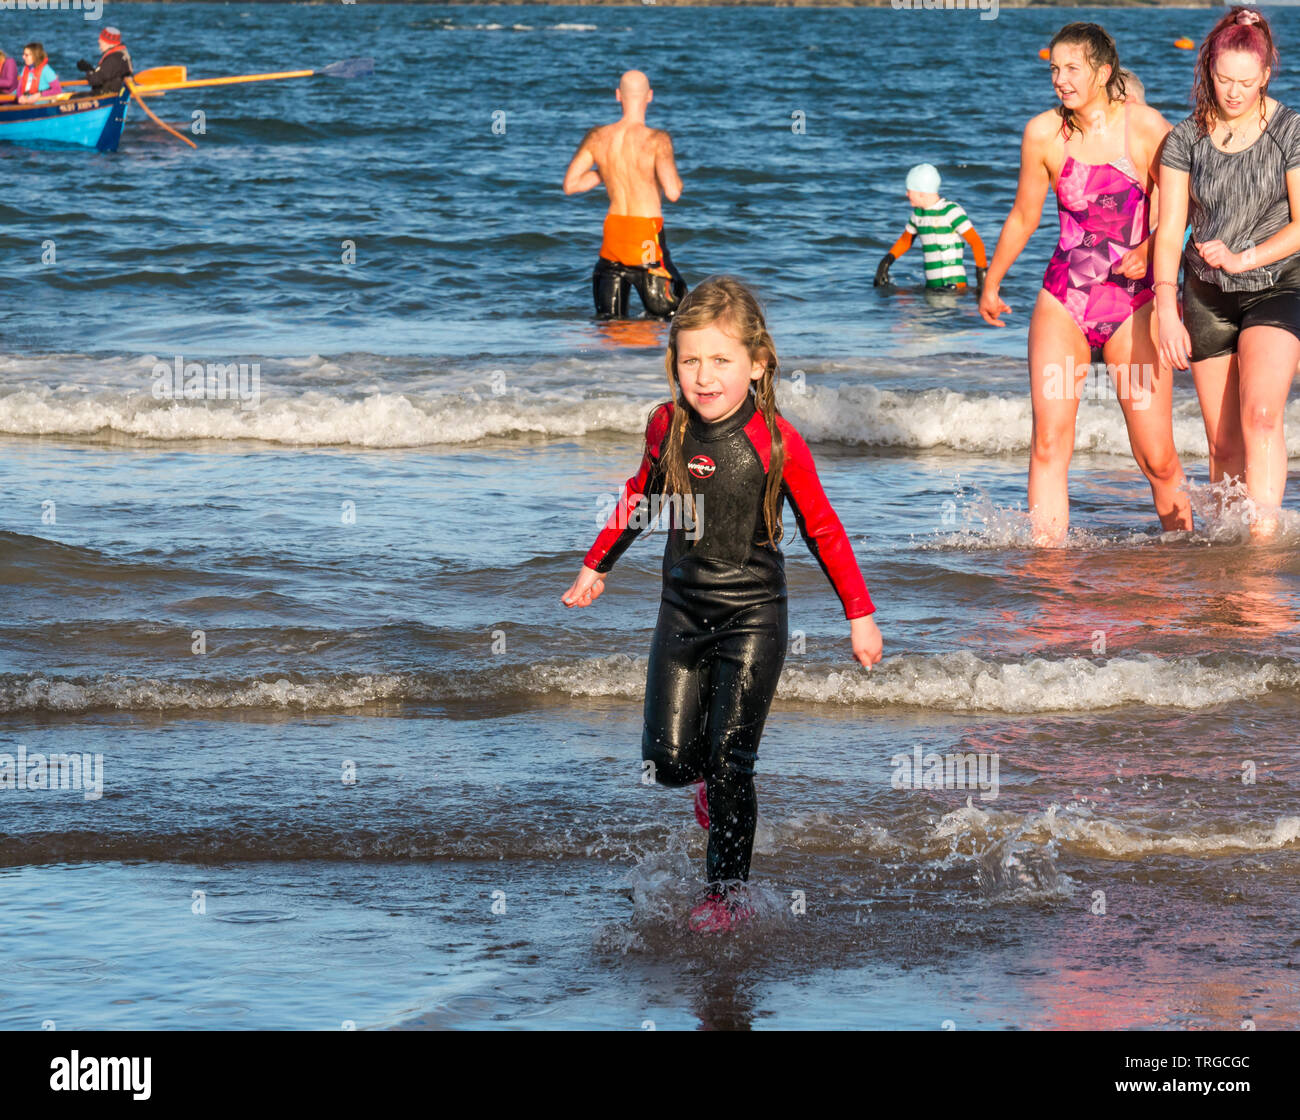 Loony Dook, New Year's Day: People brave cold water of West Bay, Firth of Forth, North Berwick, East Lothian, Scotland, UK. Young girl in wetsuit Stock Photo